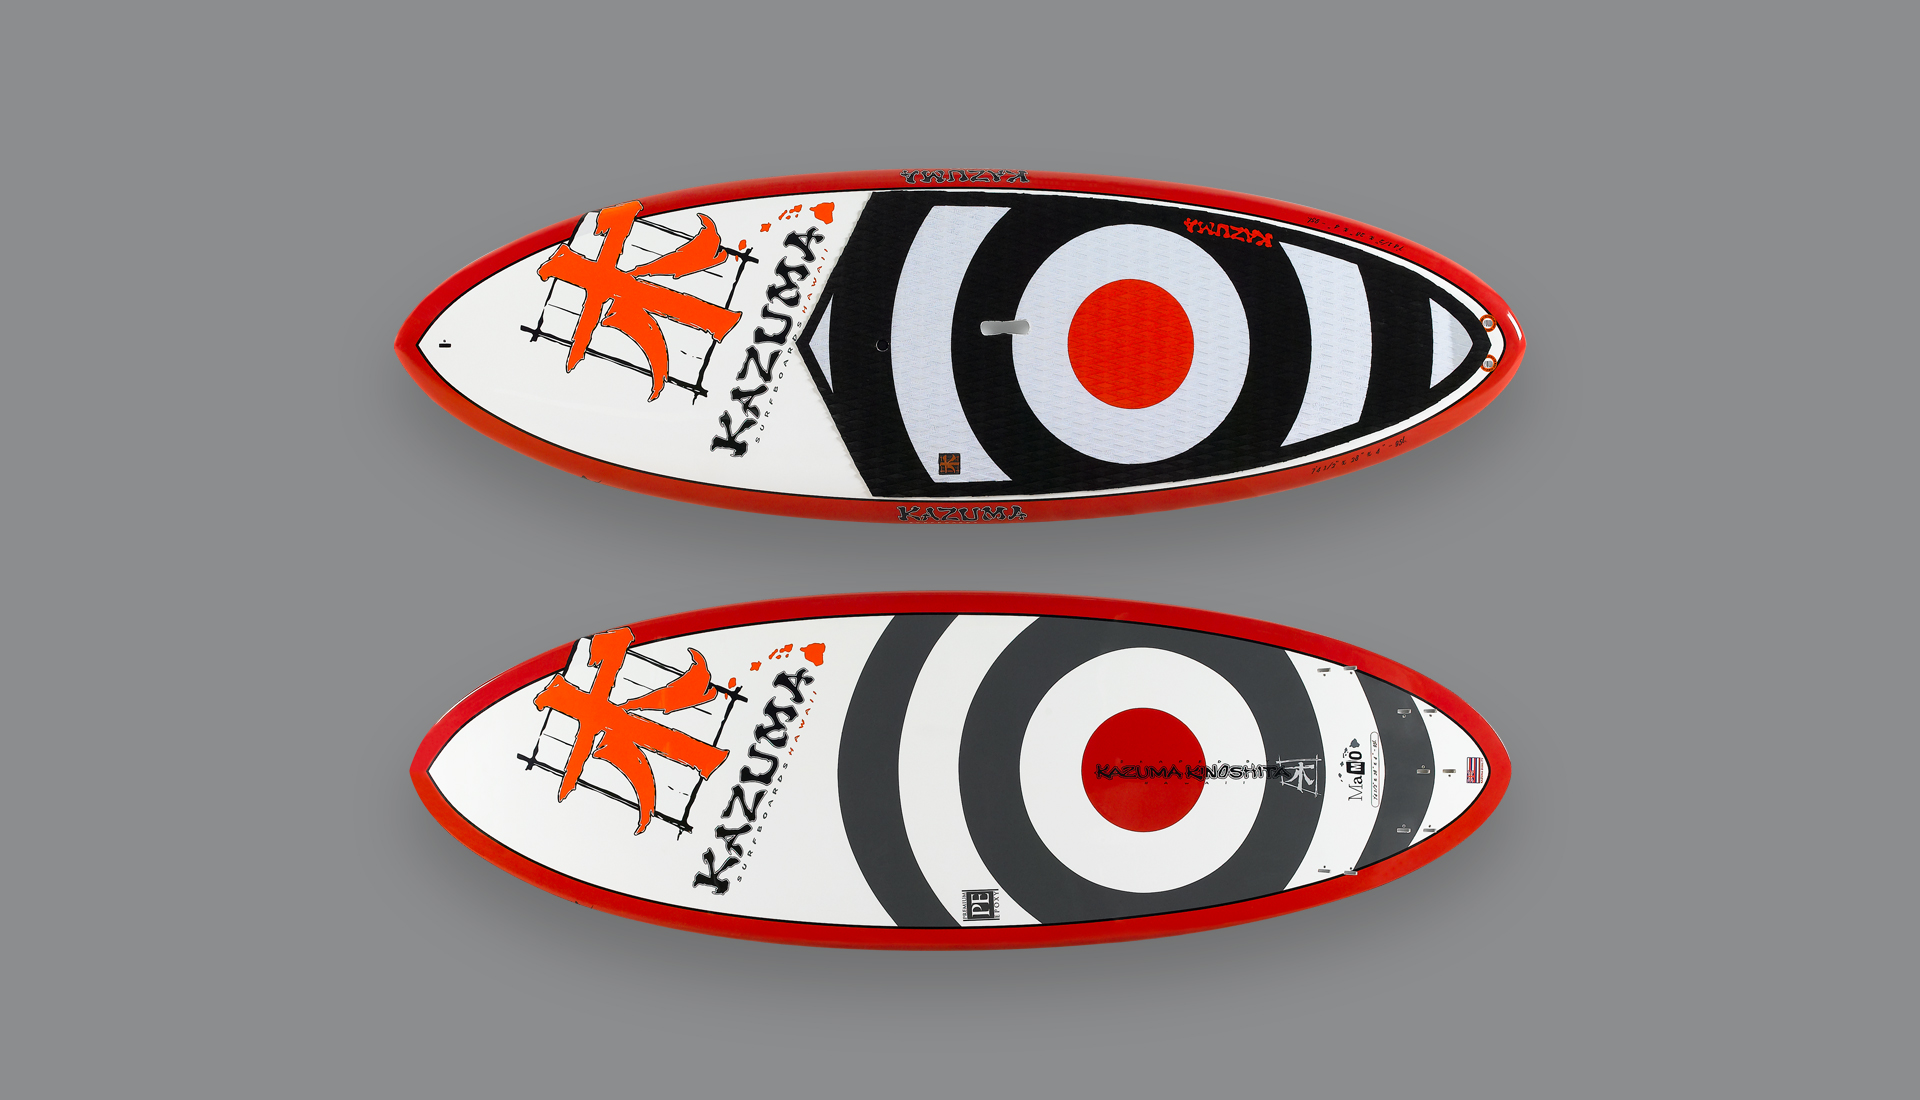 SUP And Surf Board Graphic Design For Kazuma Surfing By Eh Team Inc.